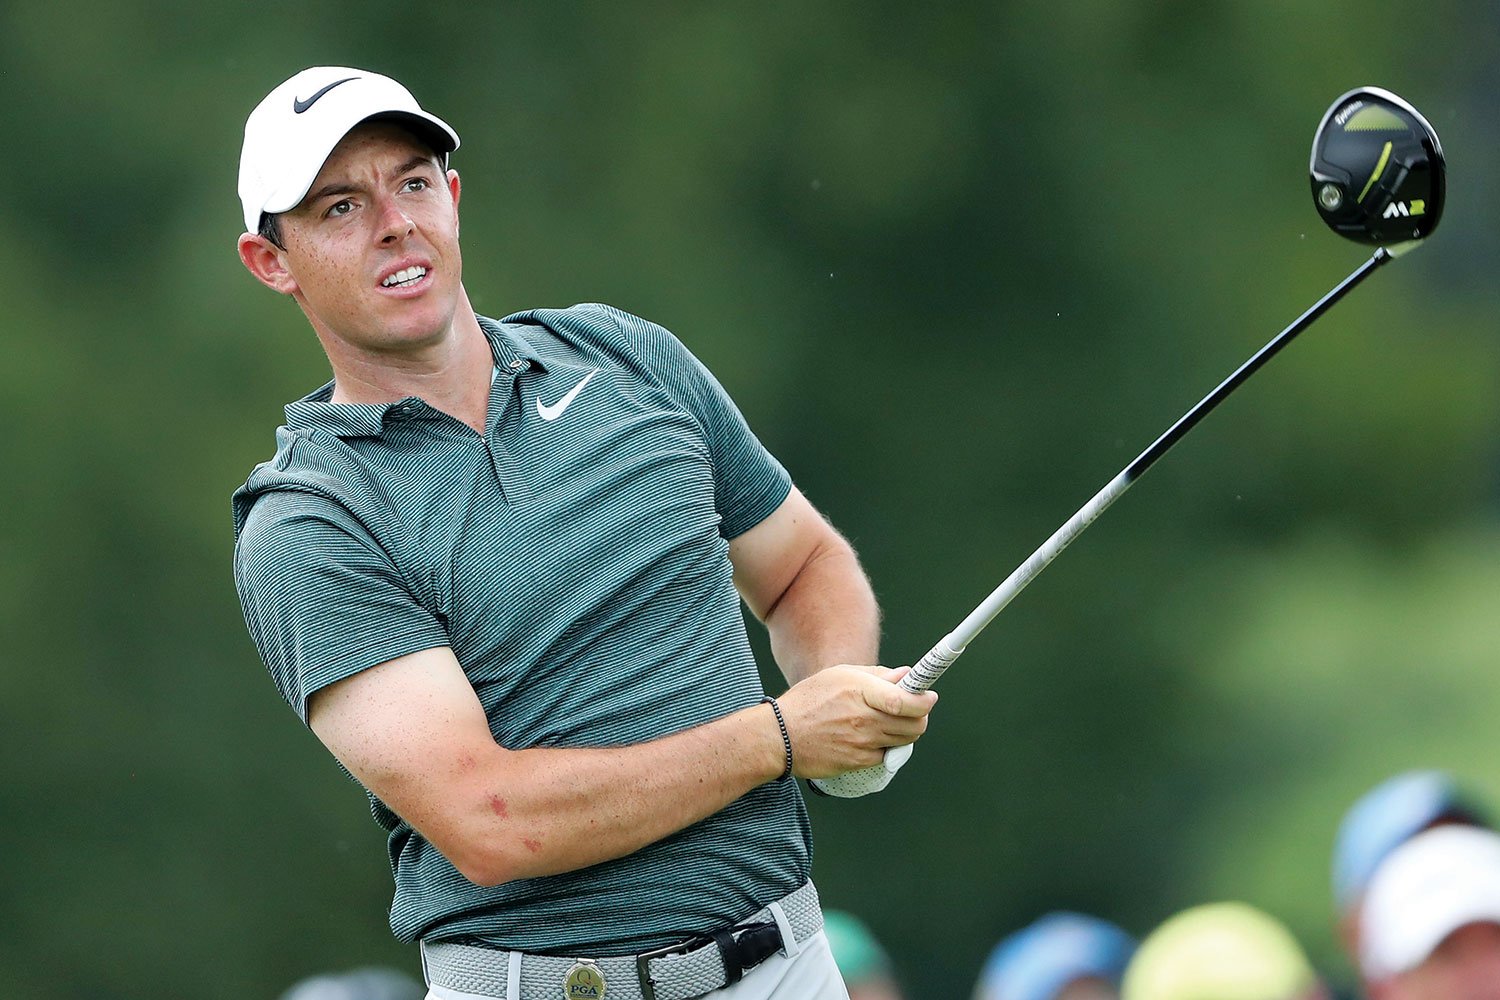 While fitter and stronger, Rory McIlroy seems more prone to injury than ever.